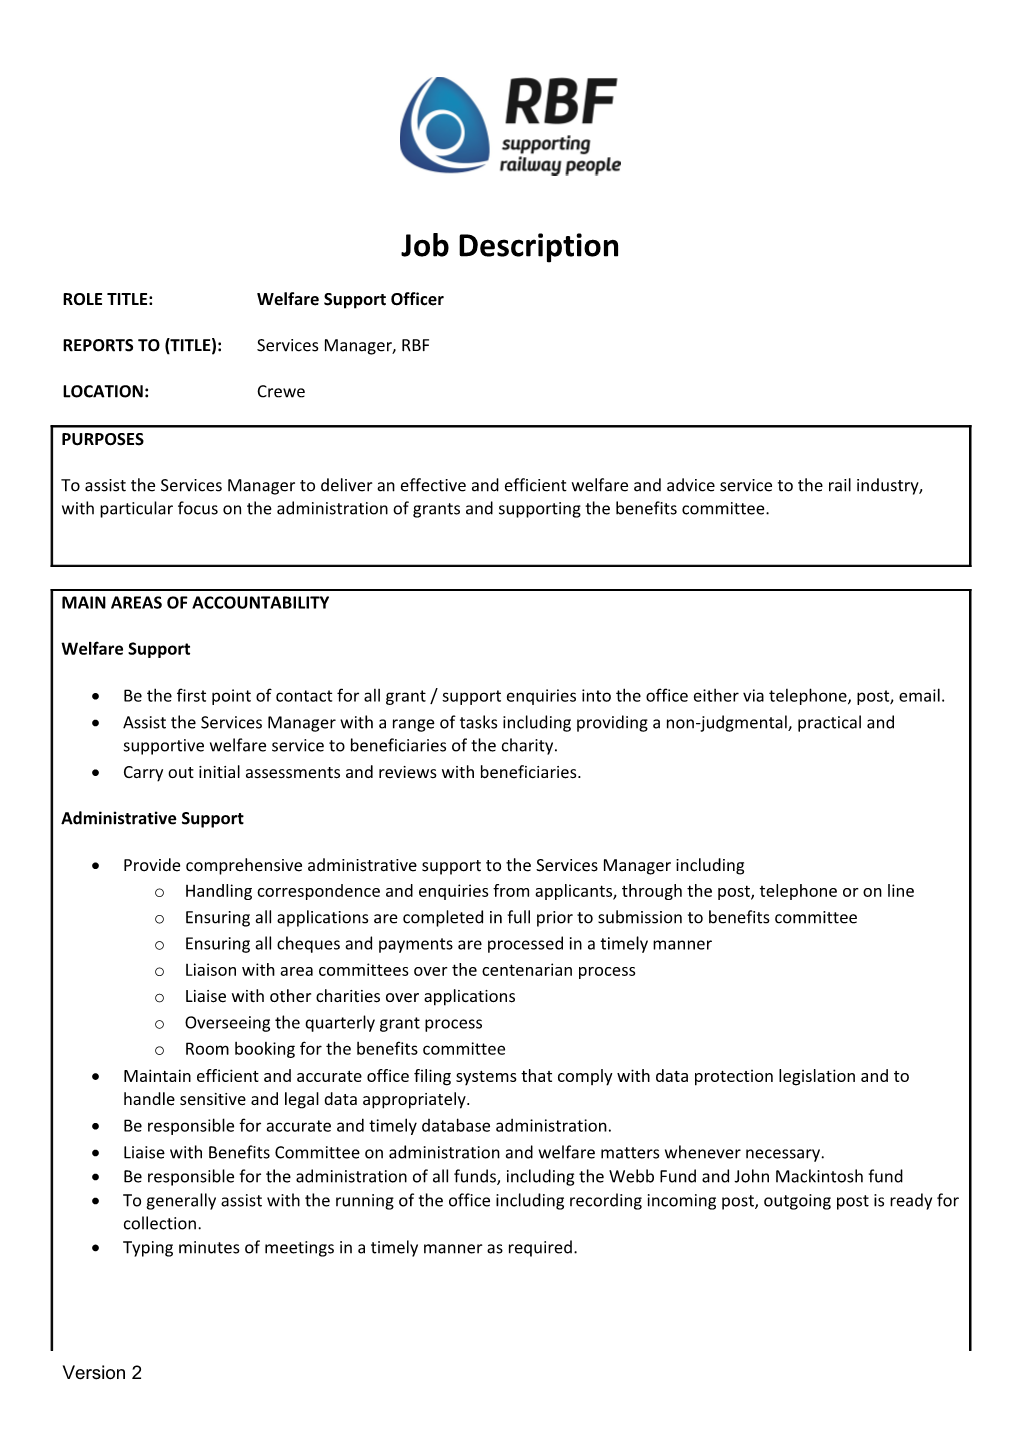 ROLE TITLE: Welfare Support Officer